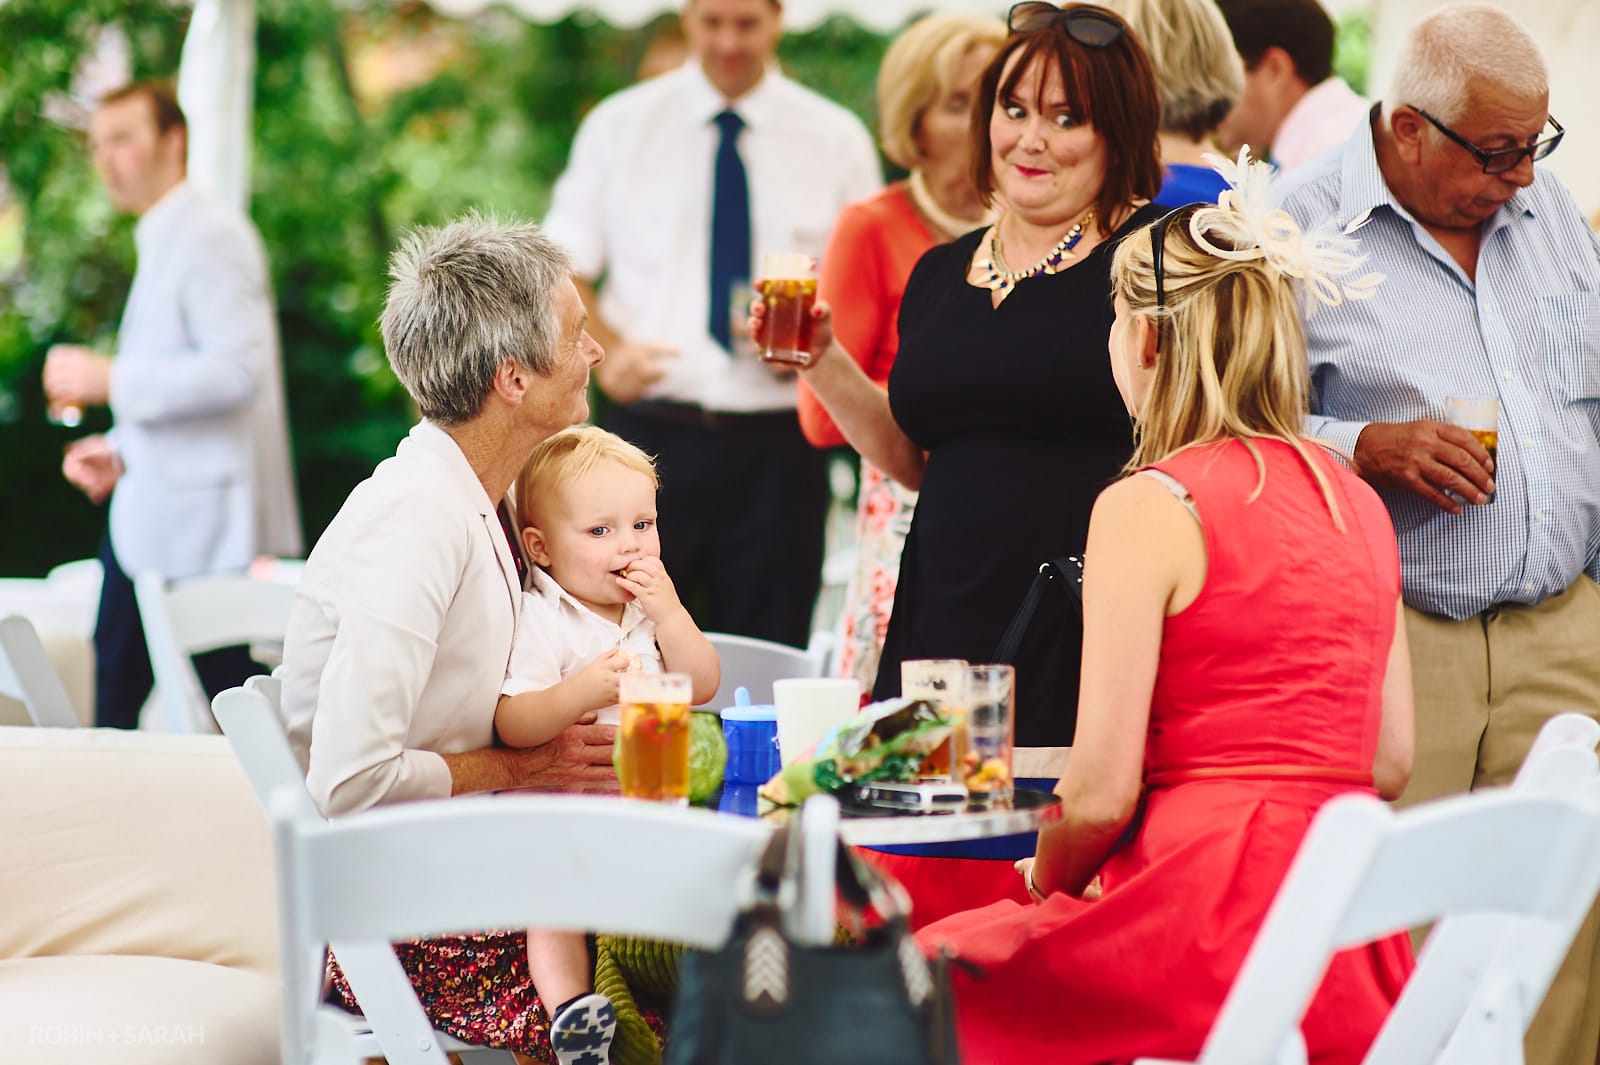 Guests chat and relax at home wedding reception